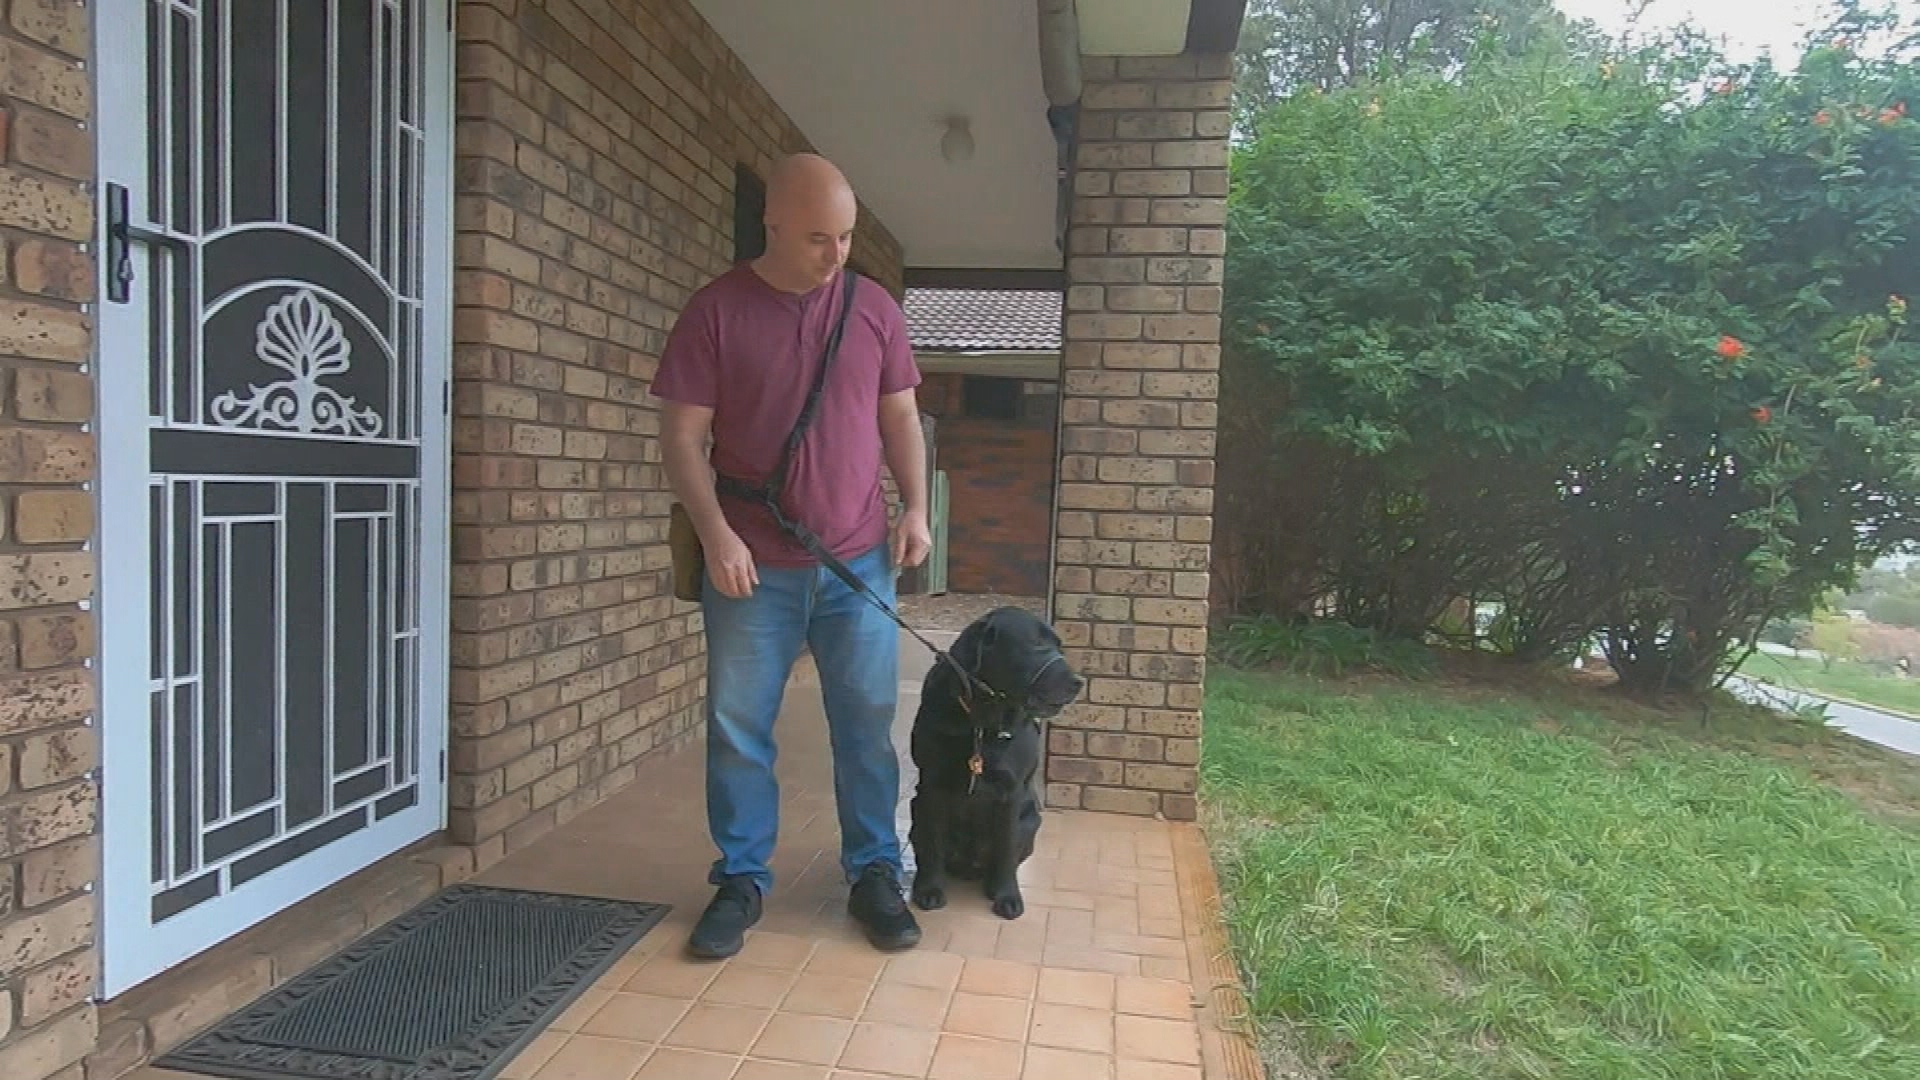 David Pearce and his English Labrador, Gunner, were denied entry to a Chinese restaurant Juicy Bao Bao on Friday.﻿